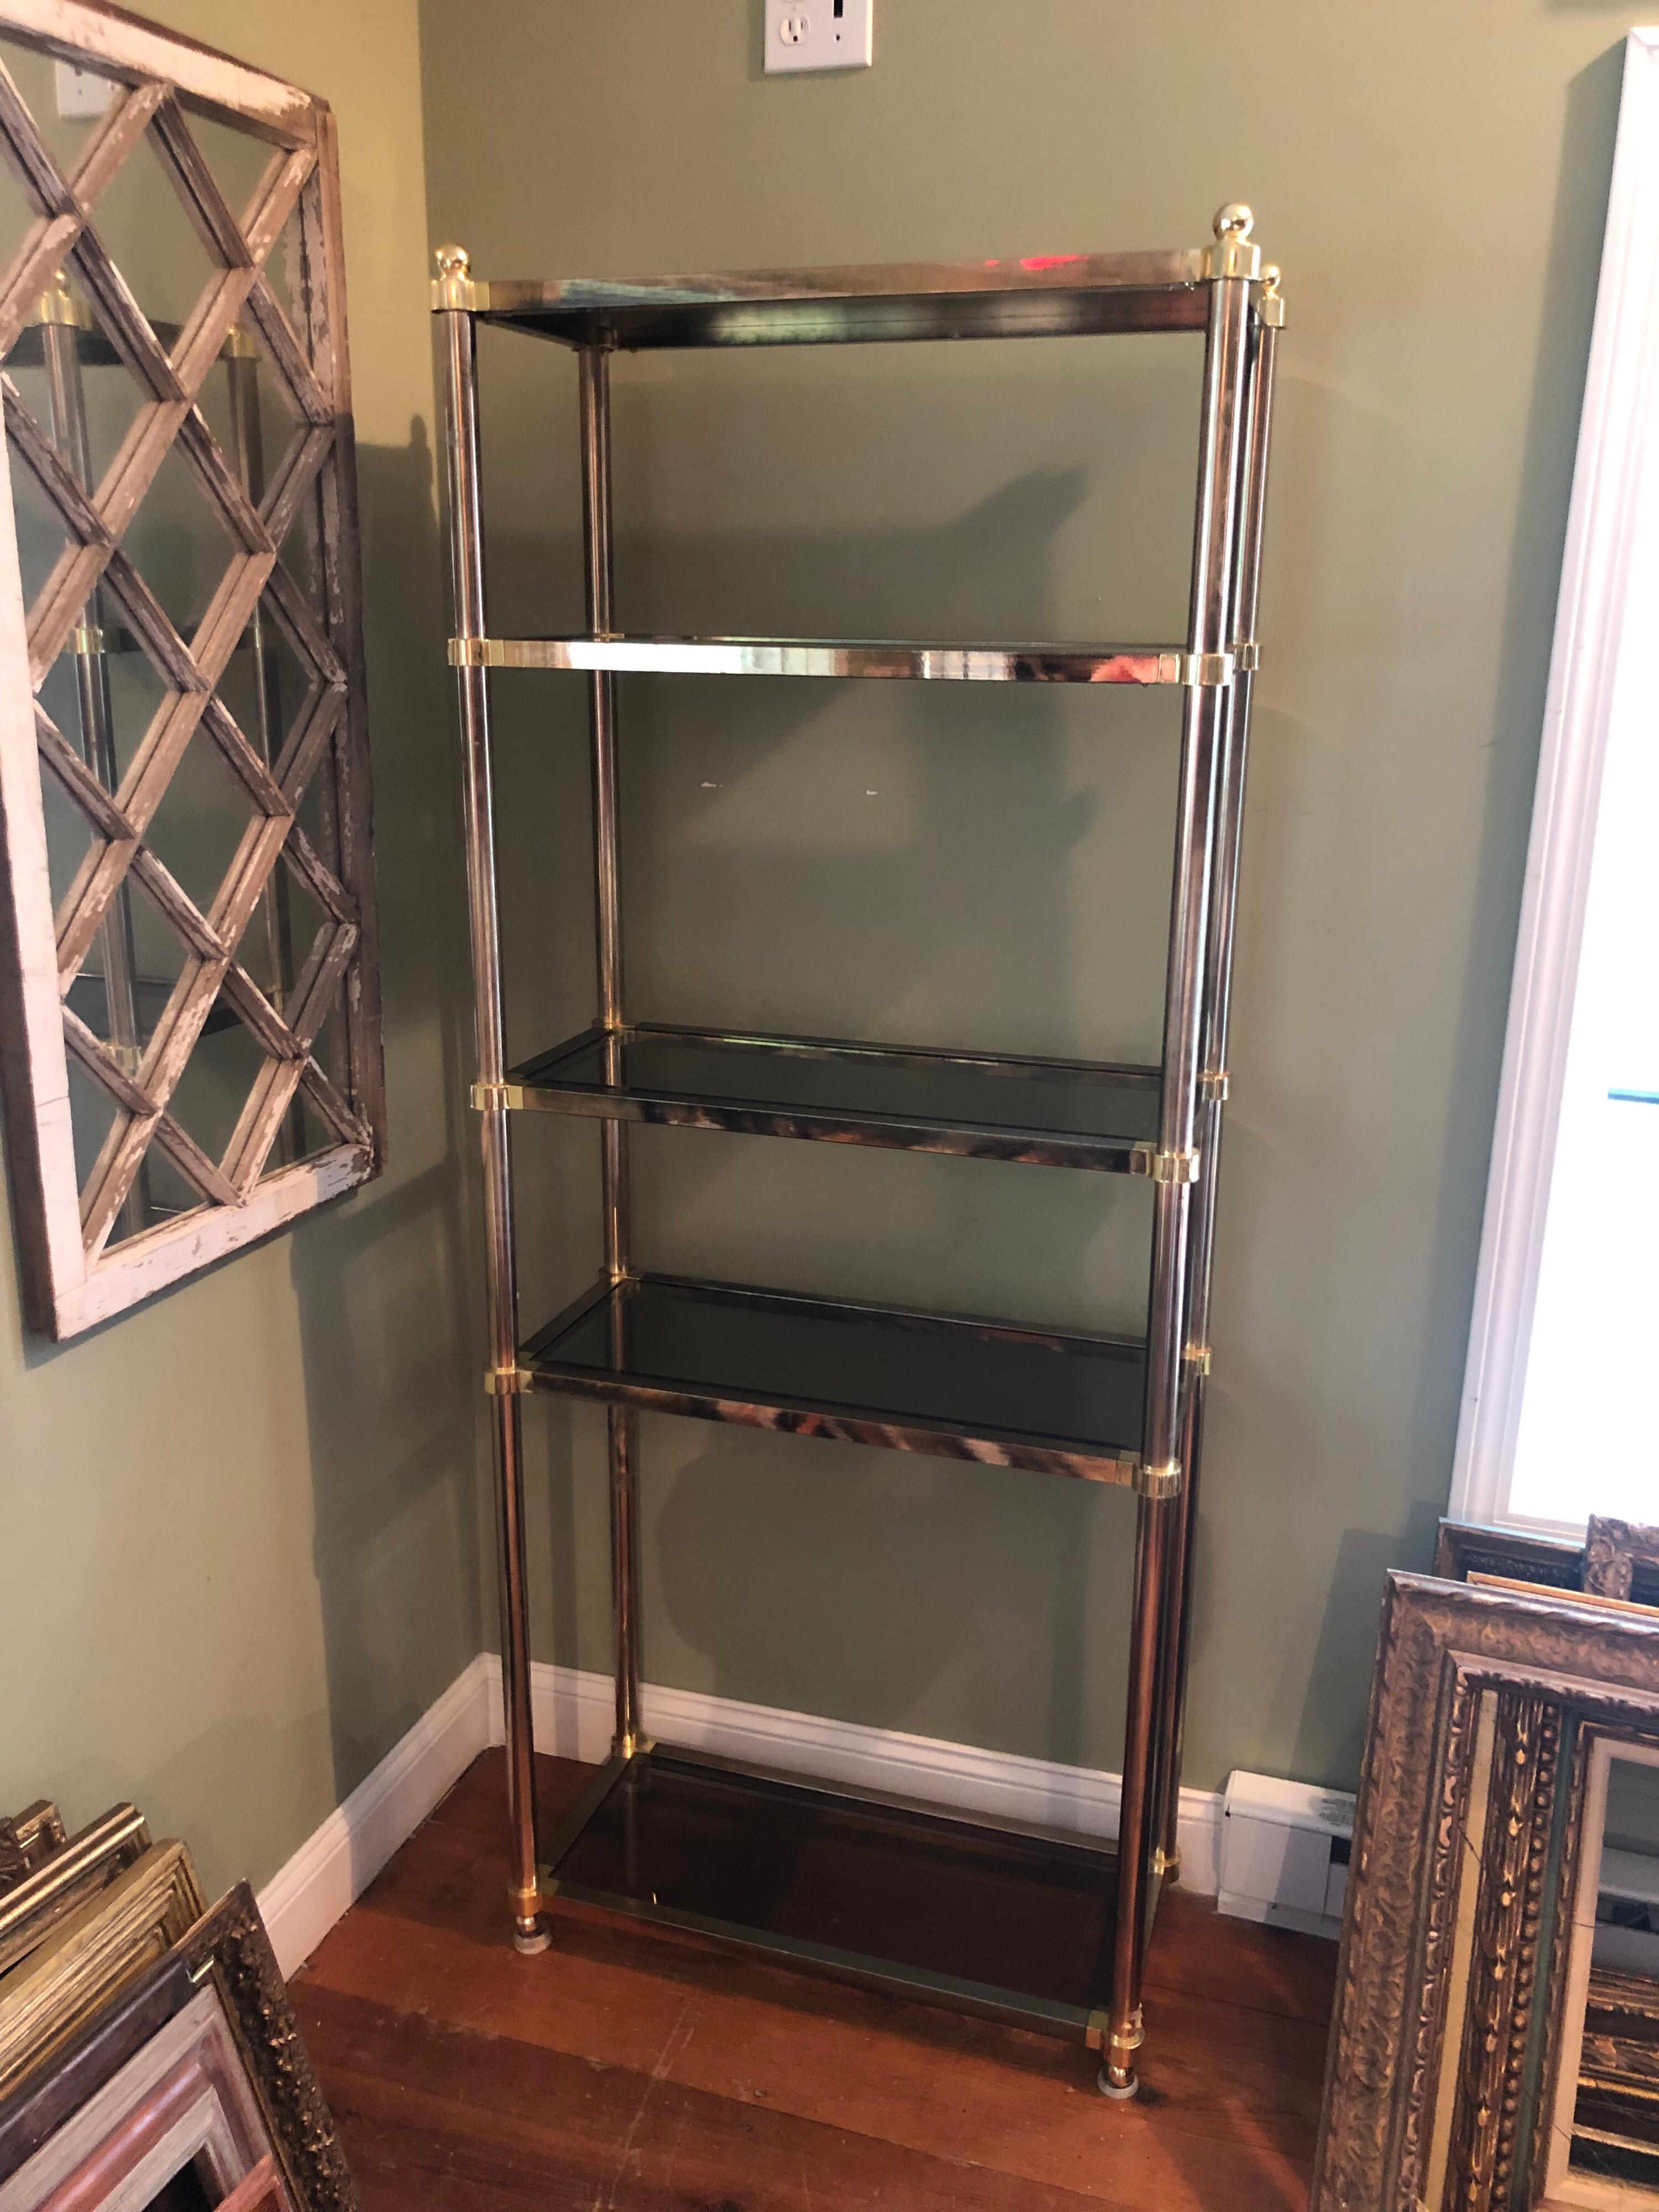 Hollywood Regency brass étagère with smoked glass. 5 smoked glass shelves. Classic styling for staging a home or shop. Some patina and wear to brass finish.